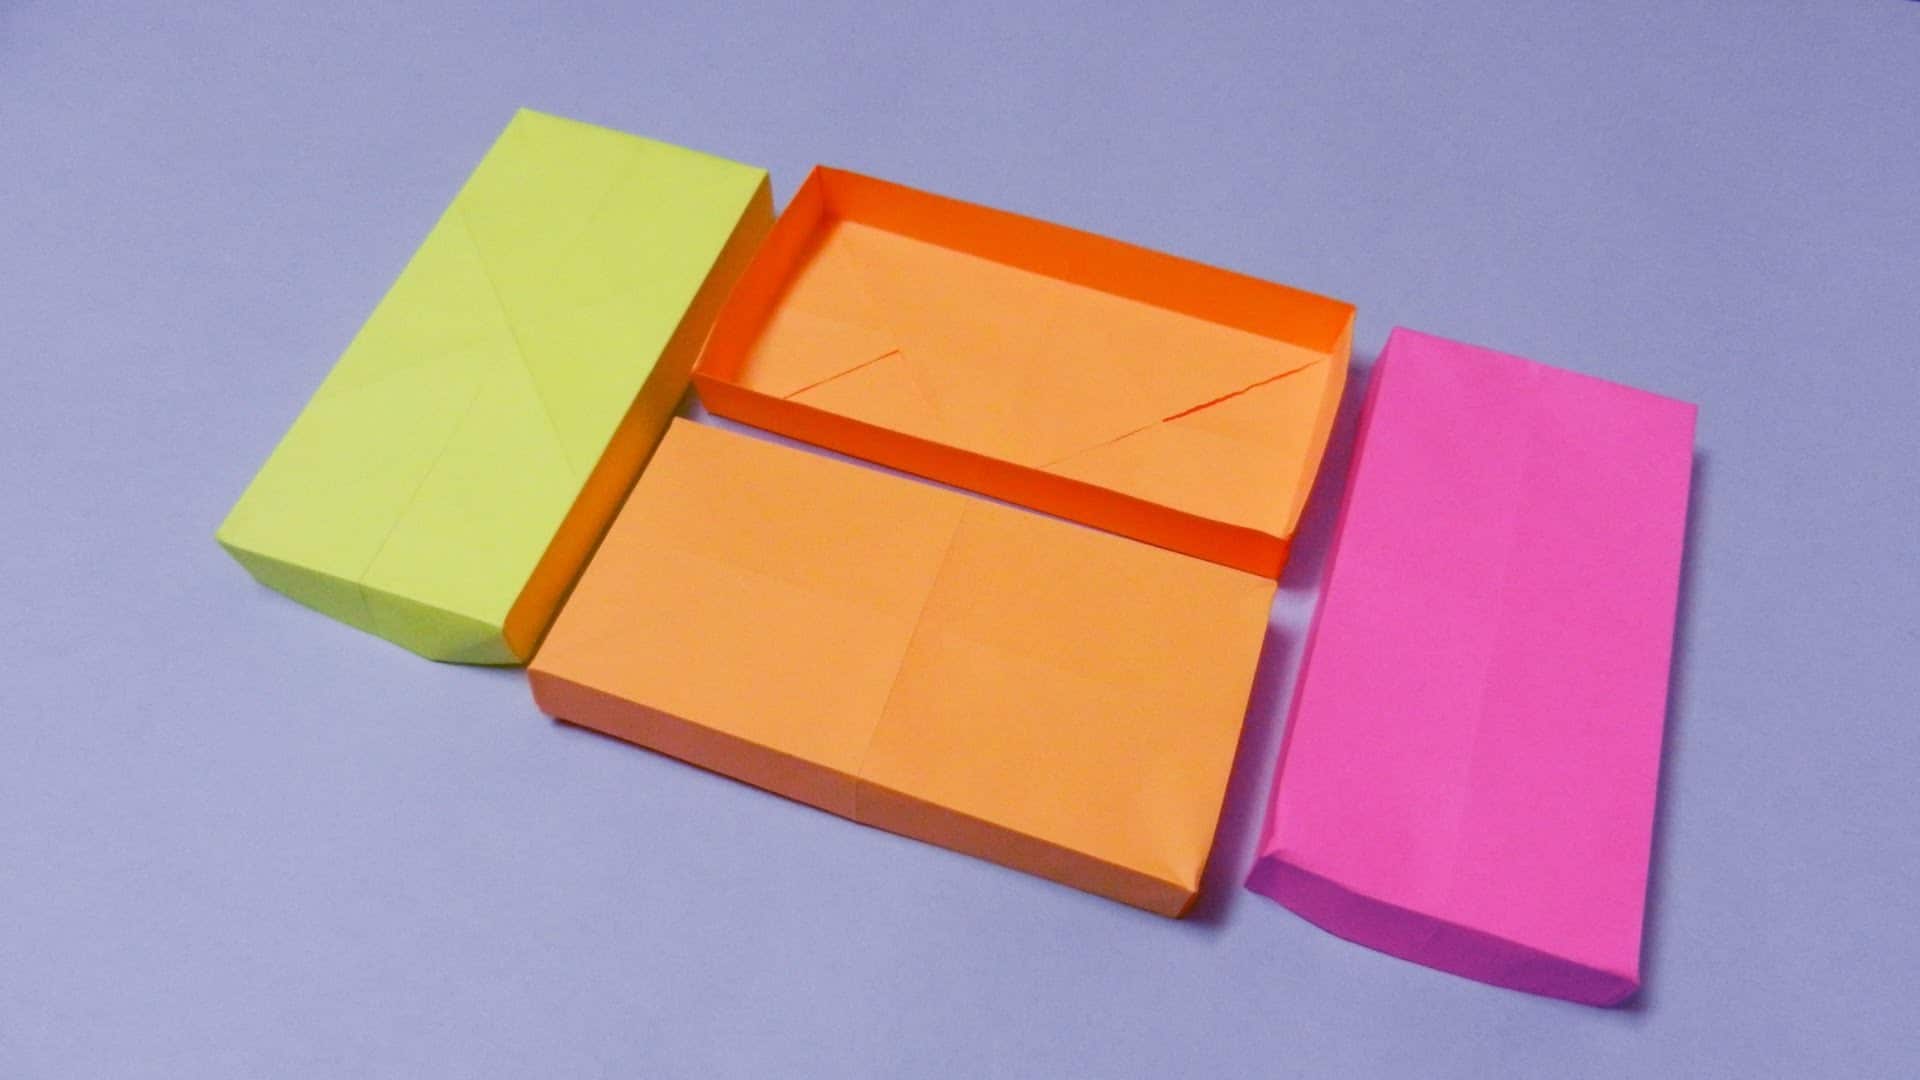 How To Make A Box Out Of Paper A Step By Step Guide